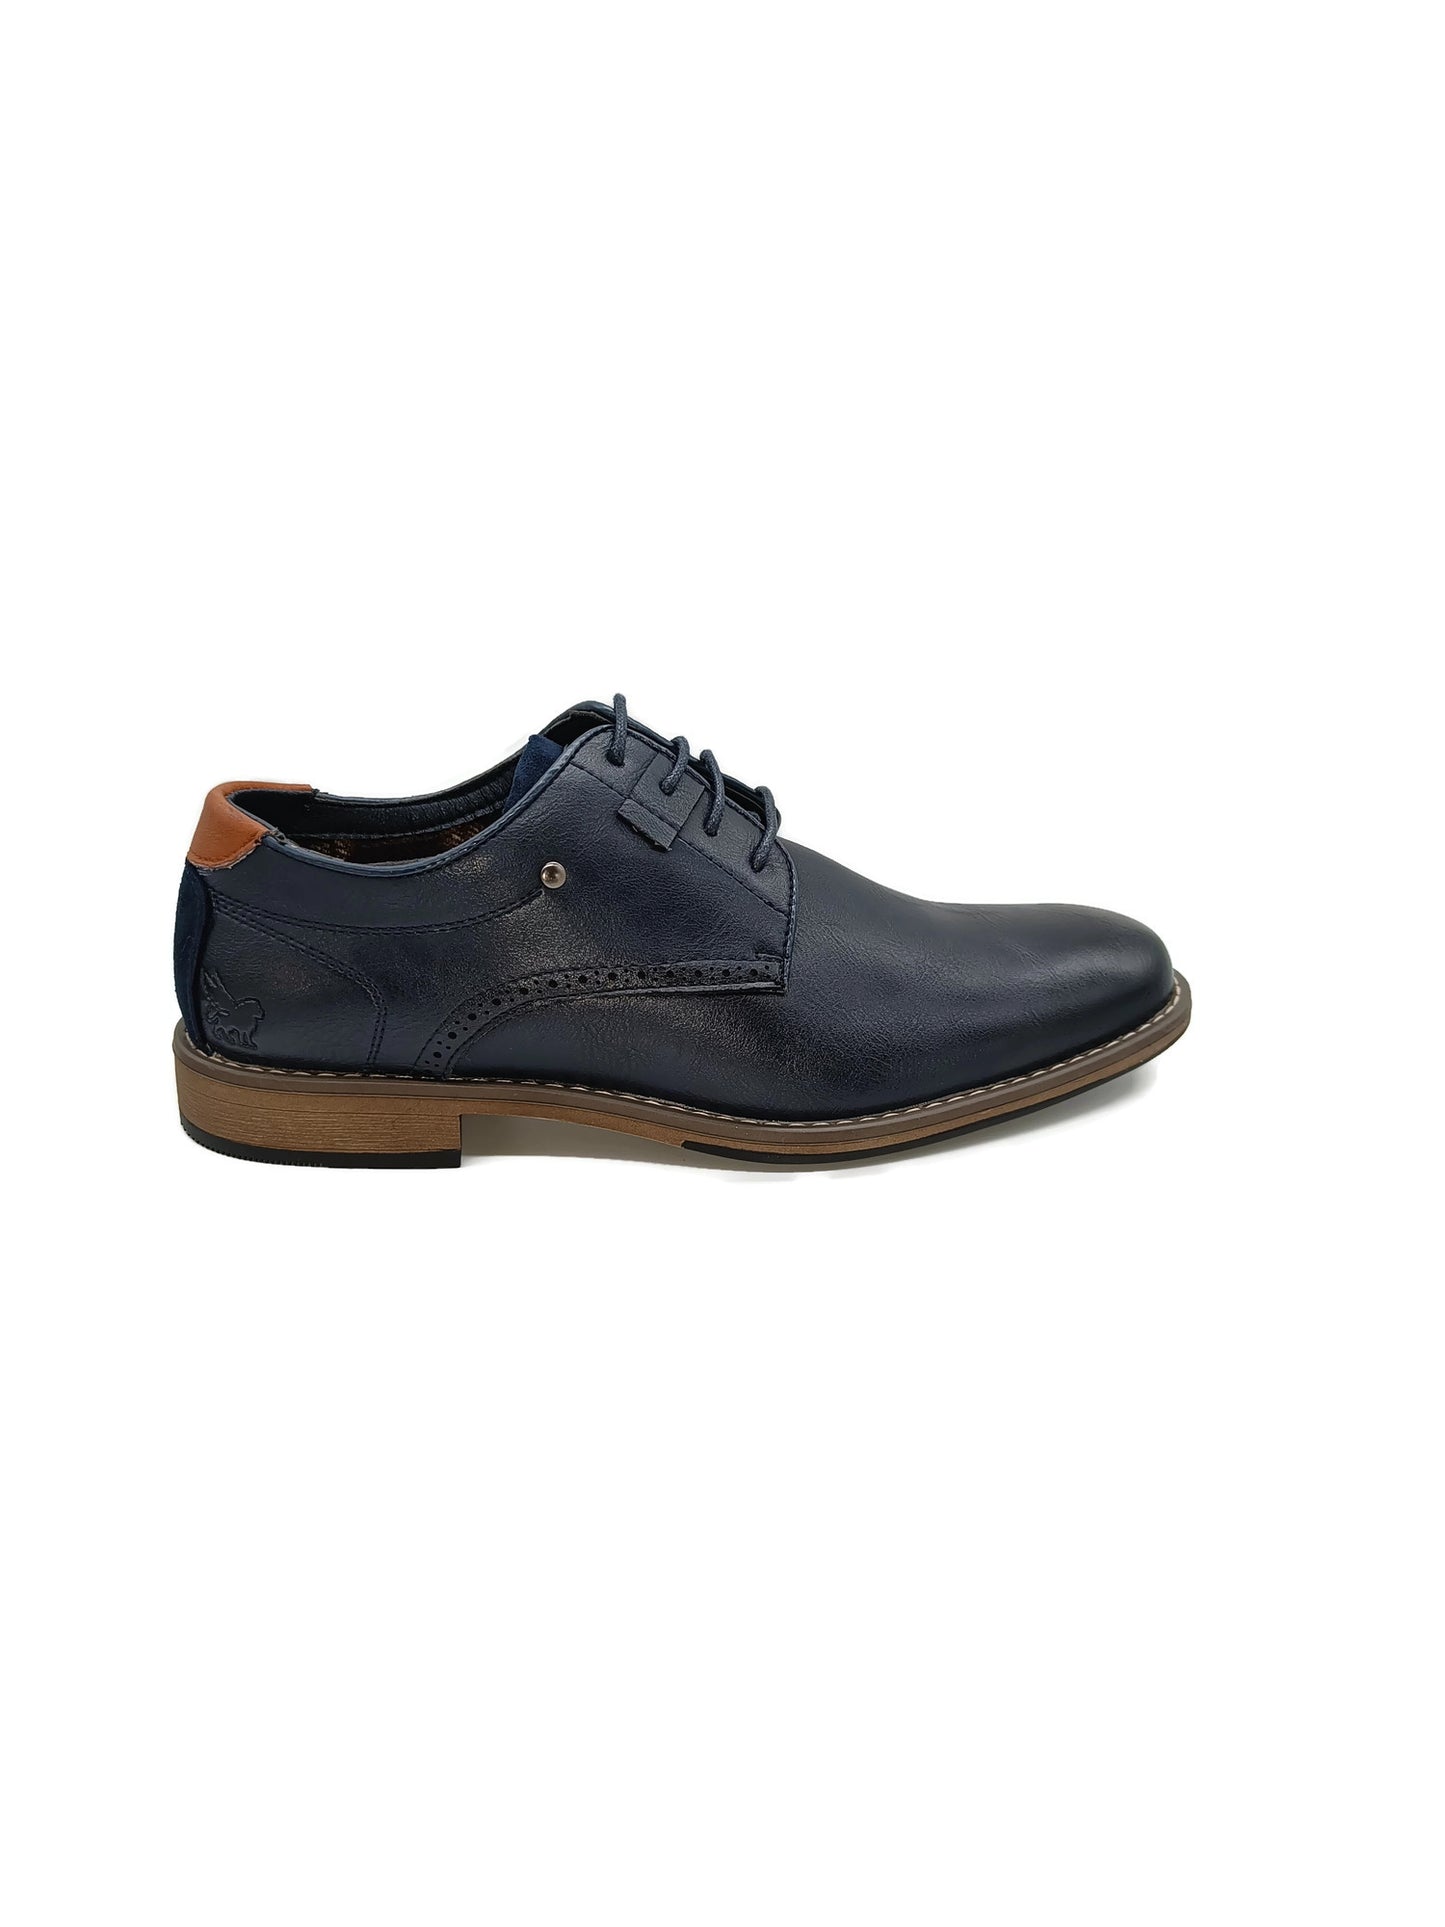 Marcozzi of Venice Mario Midnight Blue/Navy Lace Shoes